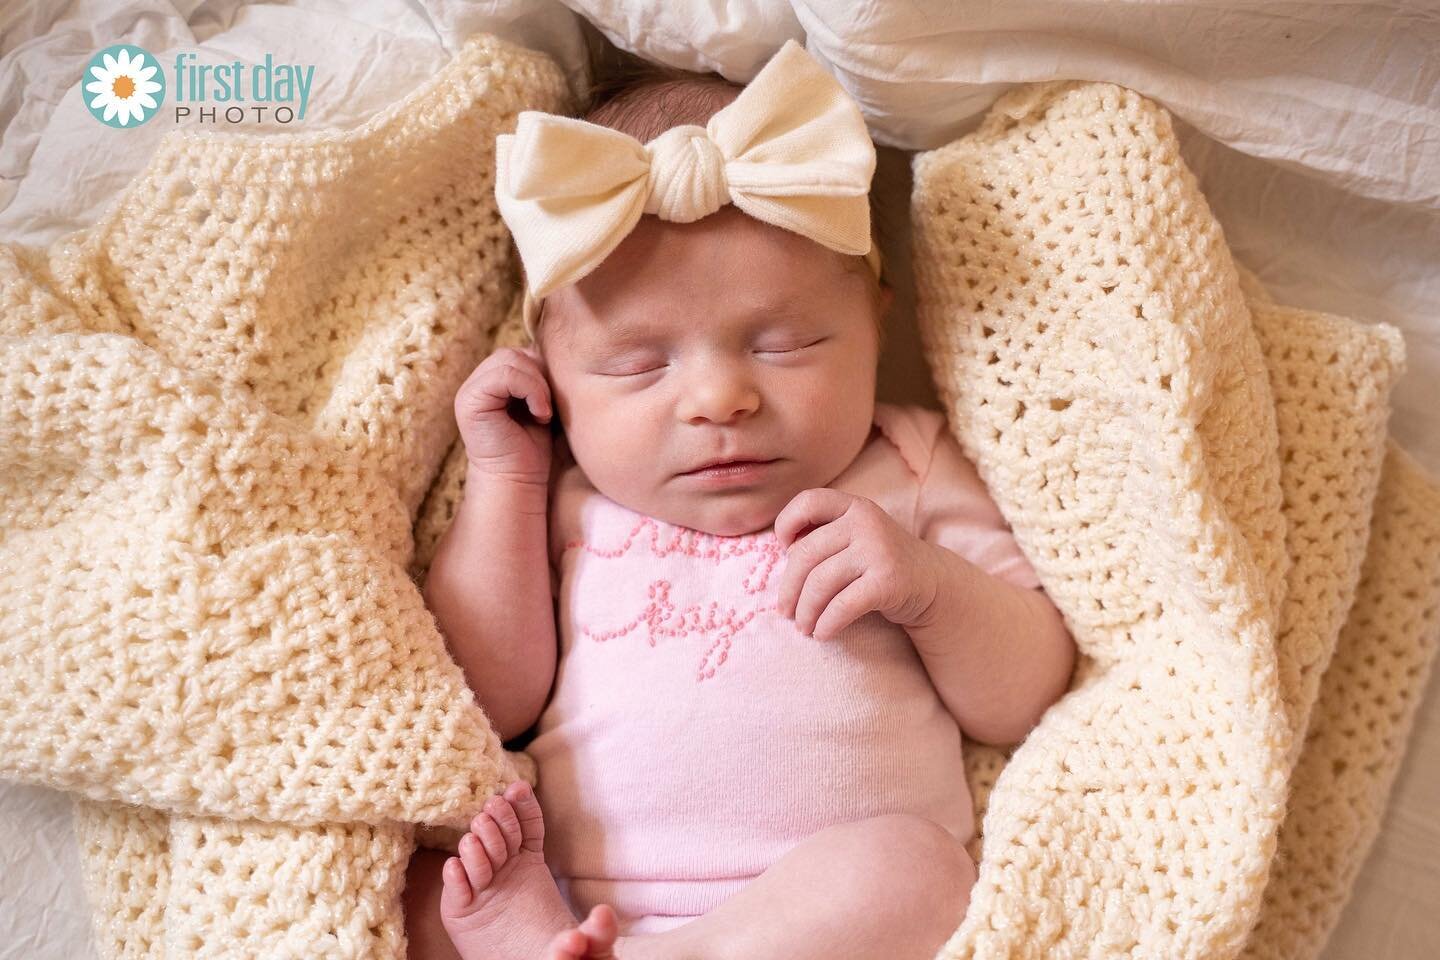 Welcome, little one!  You are loved by many. 💕🎀
#firstdayphoto
www.firstdayphoto.com
.
.
.
.
.
#first48 #fresh48 #firstdayphotonewborns #newbaby #newborn #newborns #newbornphoto #newbornphotos #newbornphotography #newbornphotographer #baby #babypho